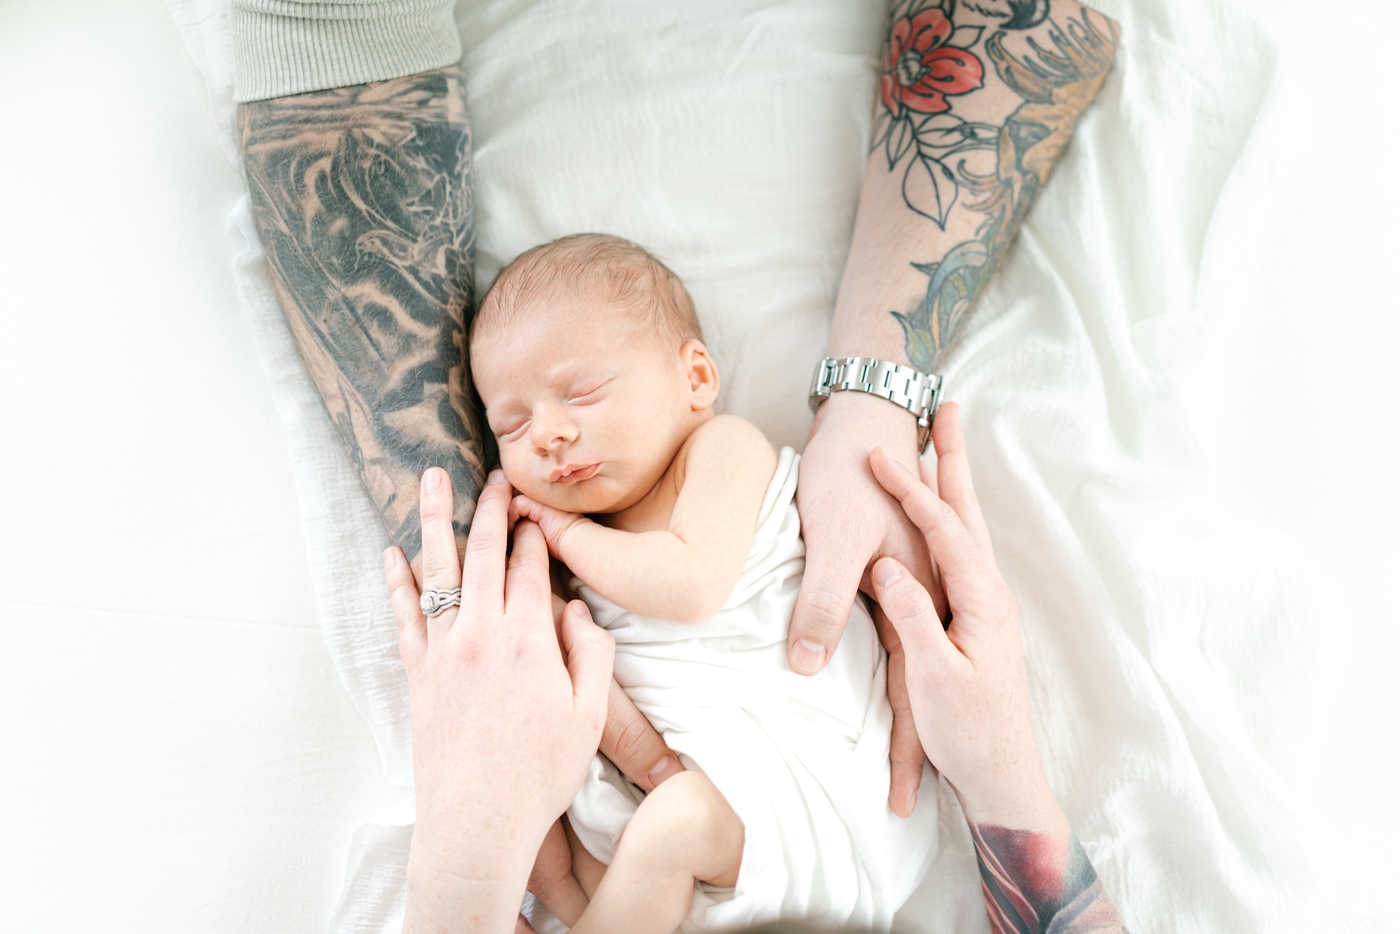 Lifestyle newborn session with baby being held by both parents. Photo by Lauren Sosler Photography.